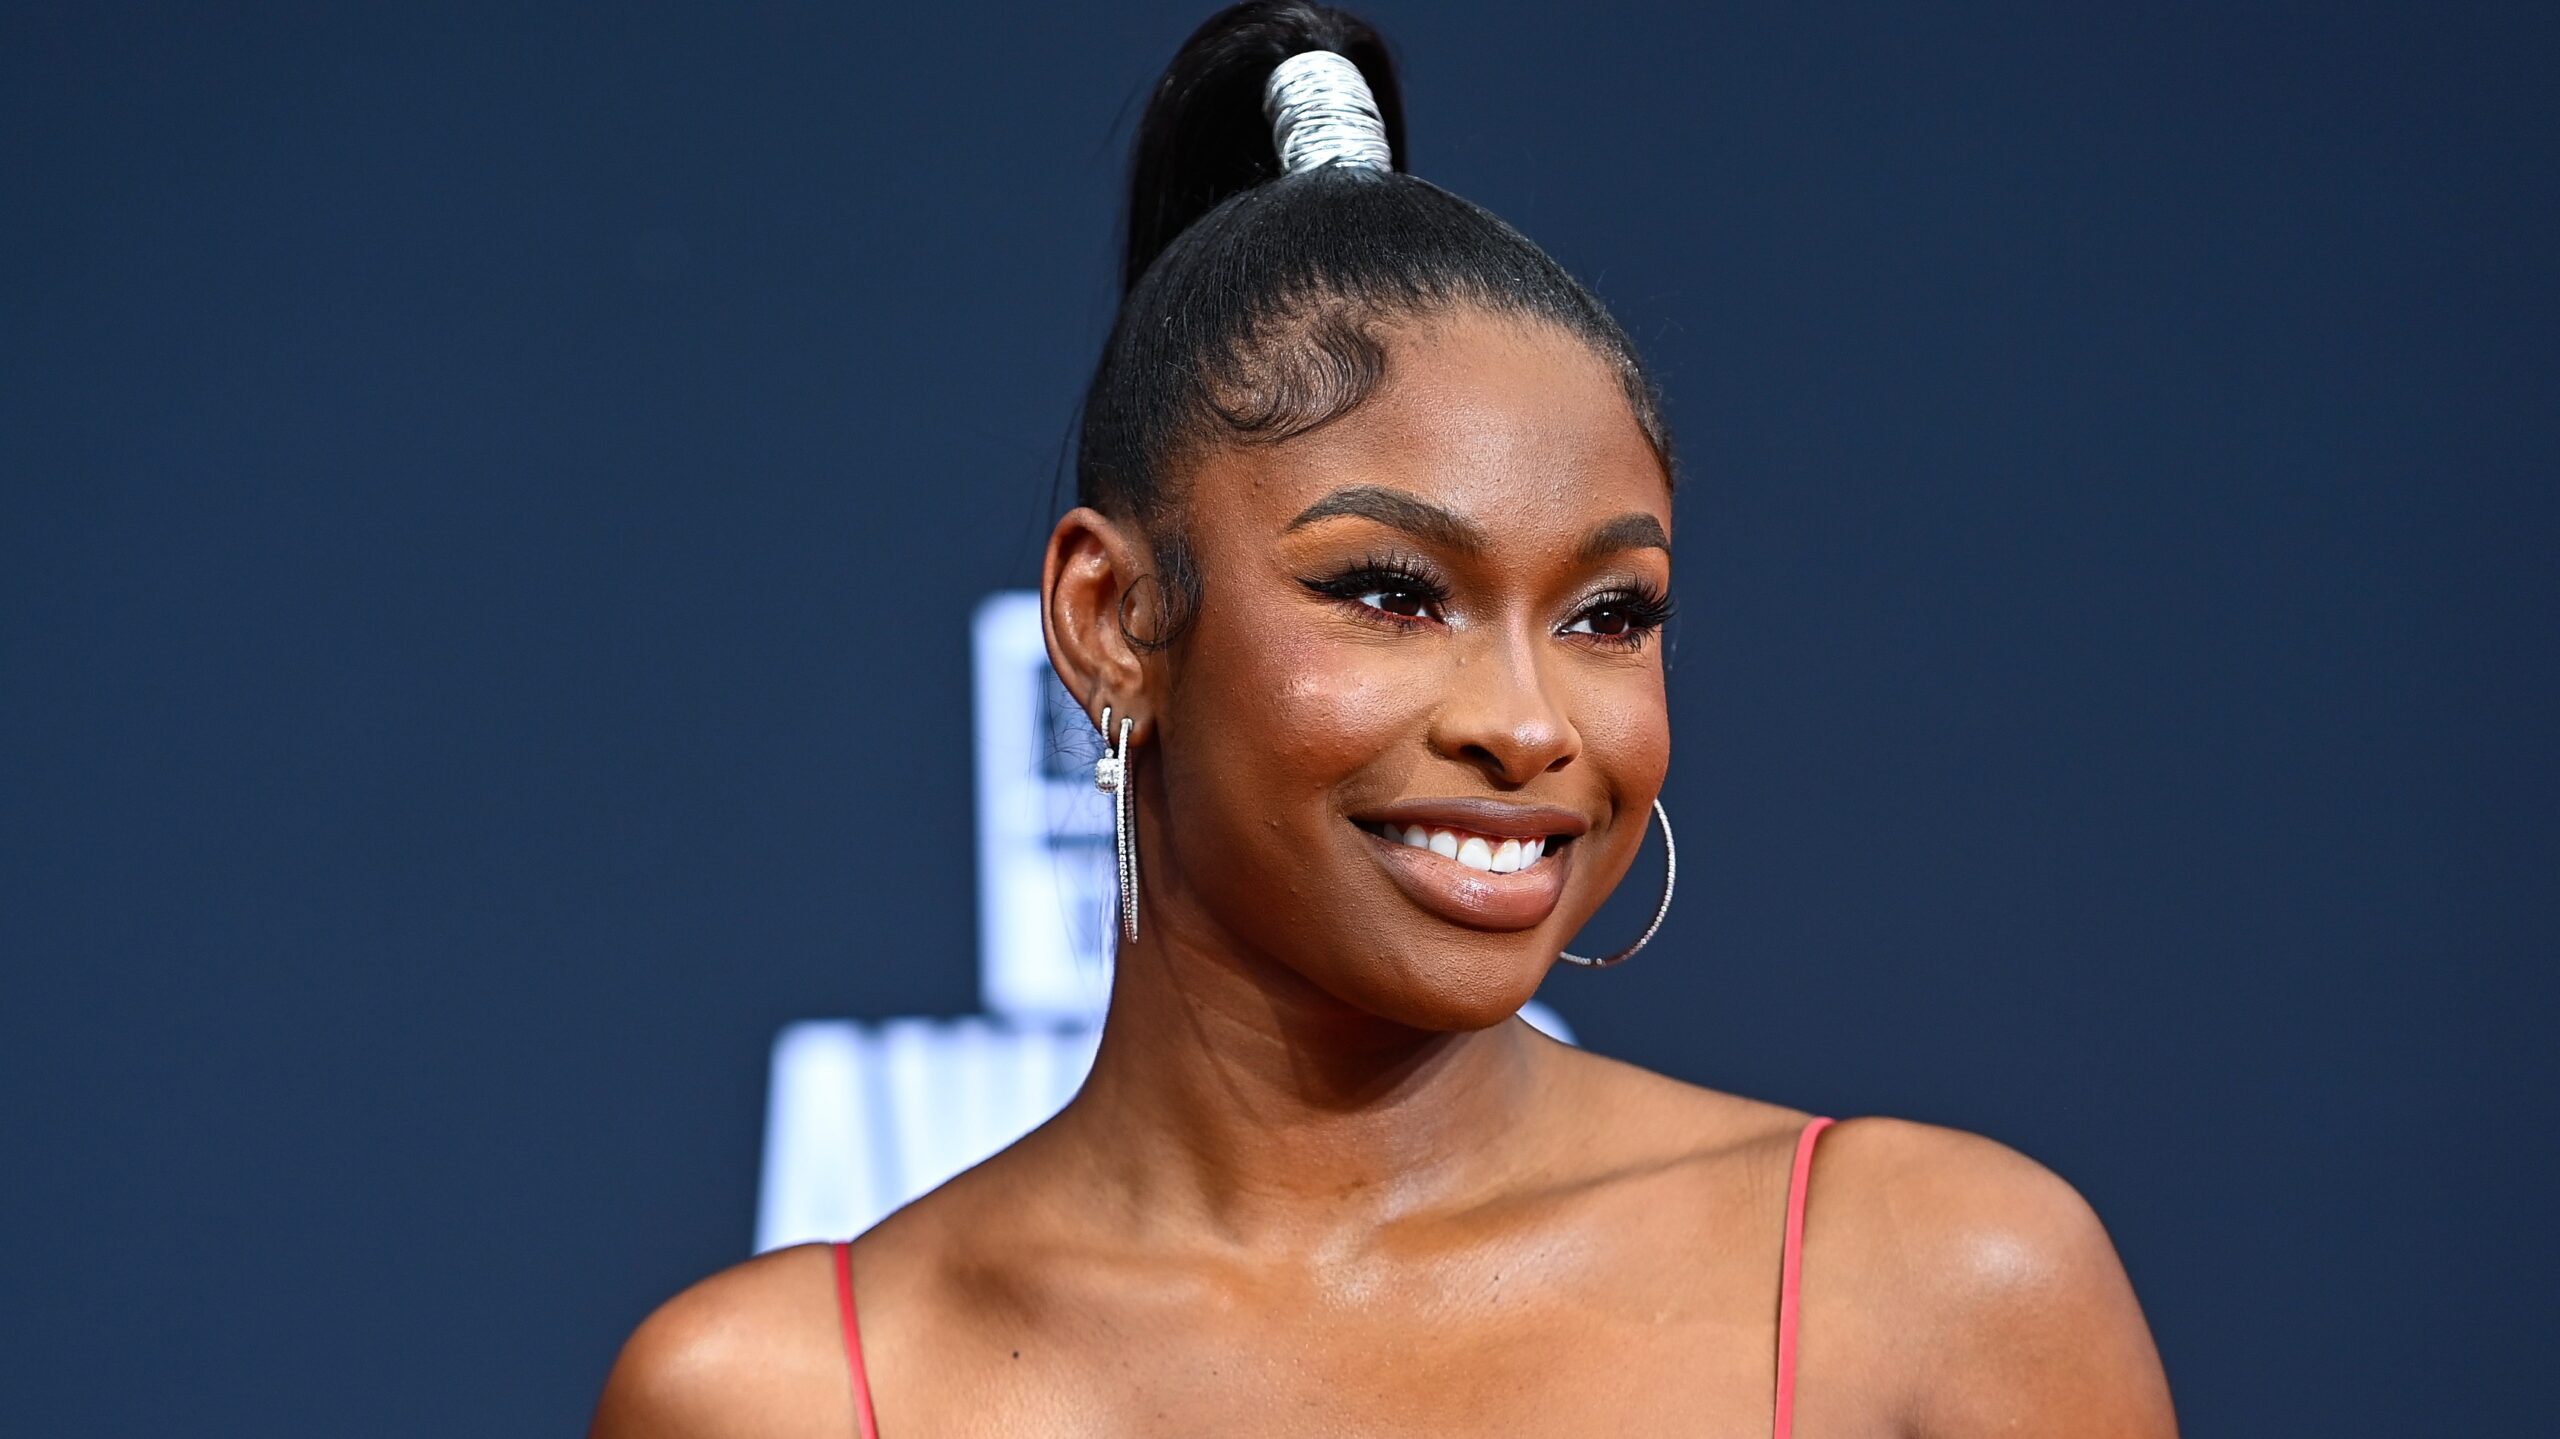 Coco Jones Slayed Her Brows With This $16 Eyebrow Pencil At The 2022 BET Awards